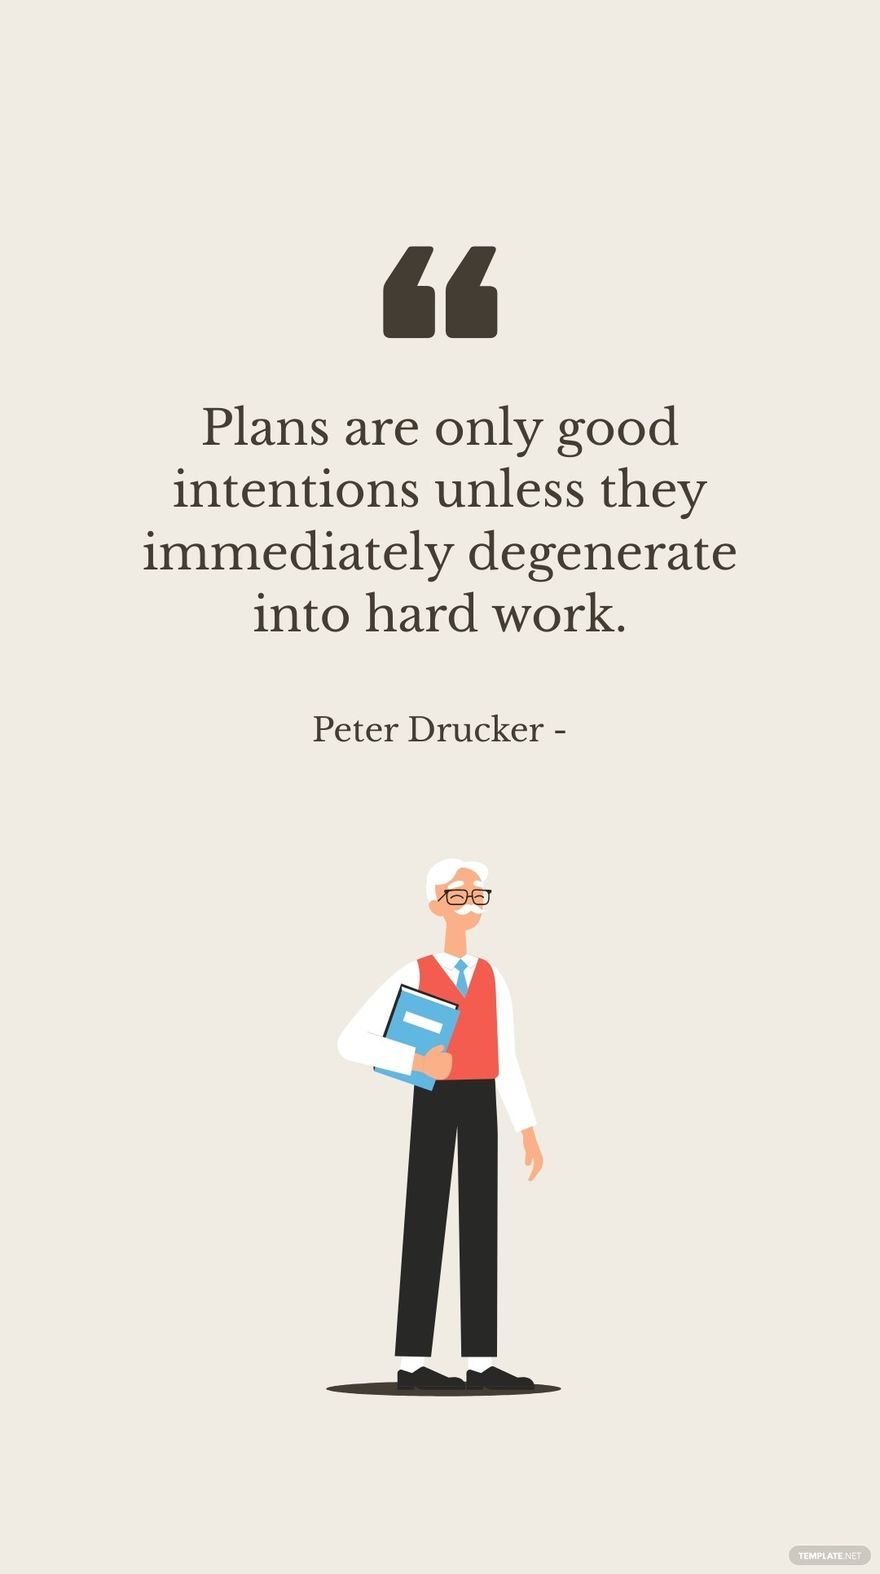 Free Peter Drucker - Plans are only good intentions unless they immediately degenerate into hard work. in JPG